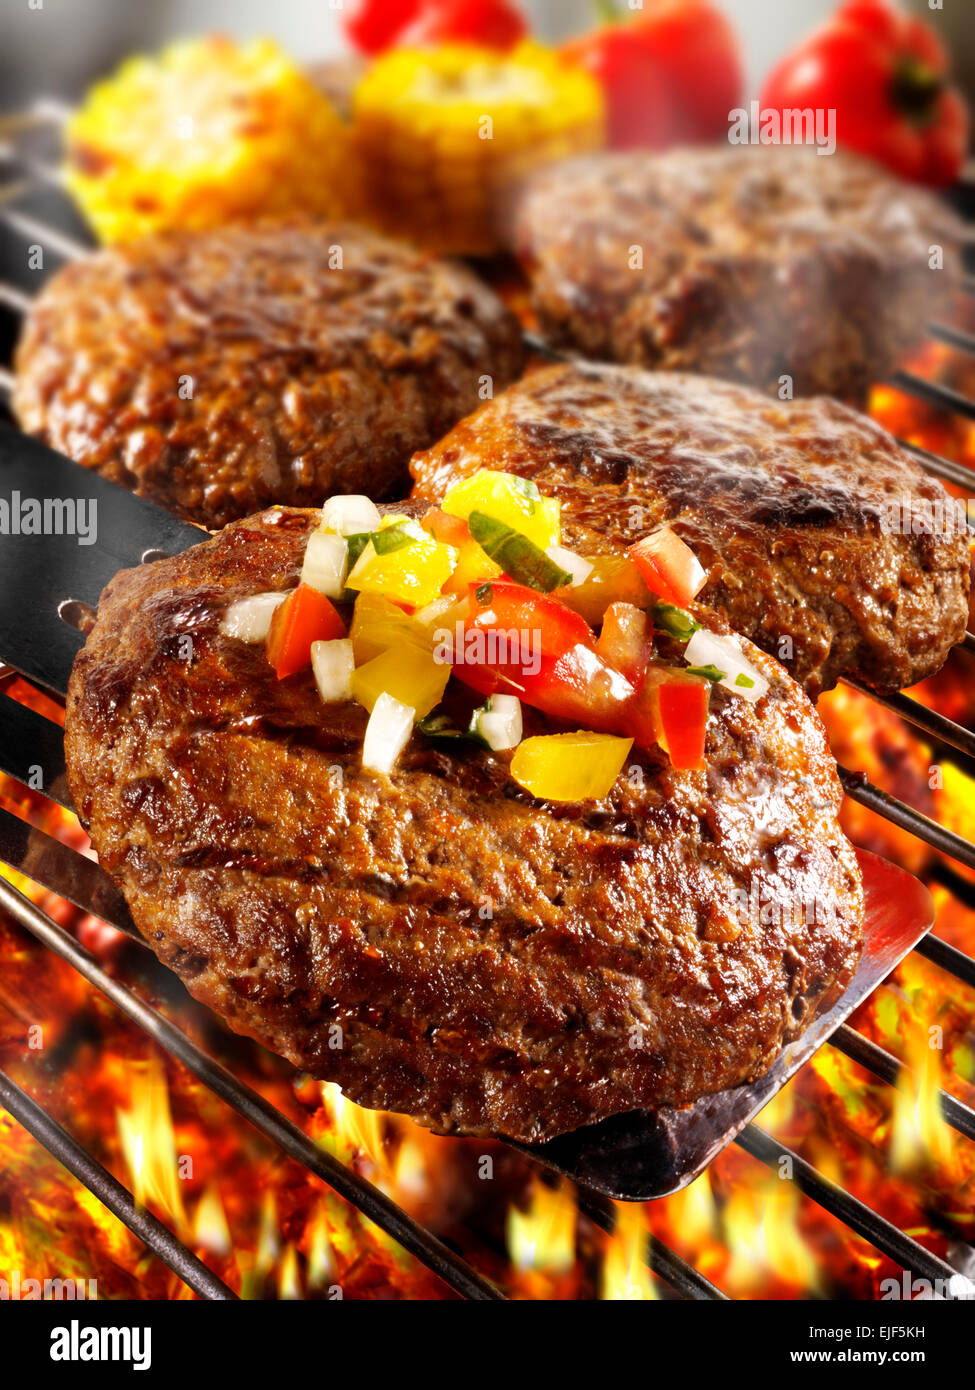 B-B-Q, barbecue burgers or hamburgers being cooked on a flaming barbecue Stock Photo